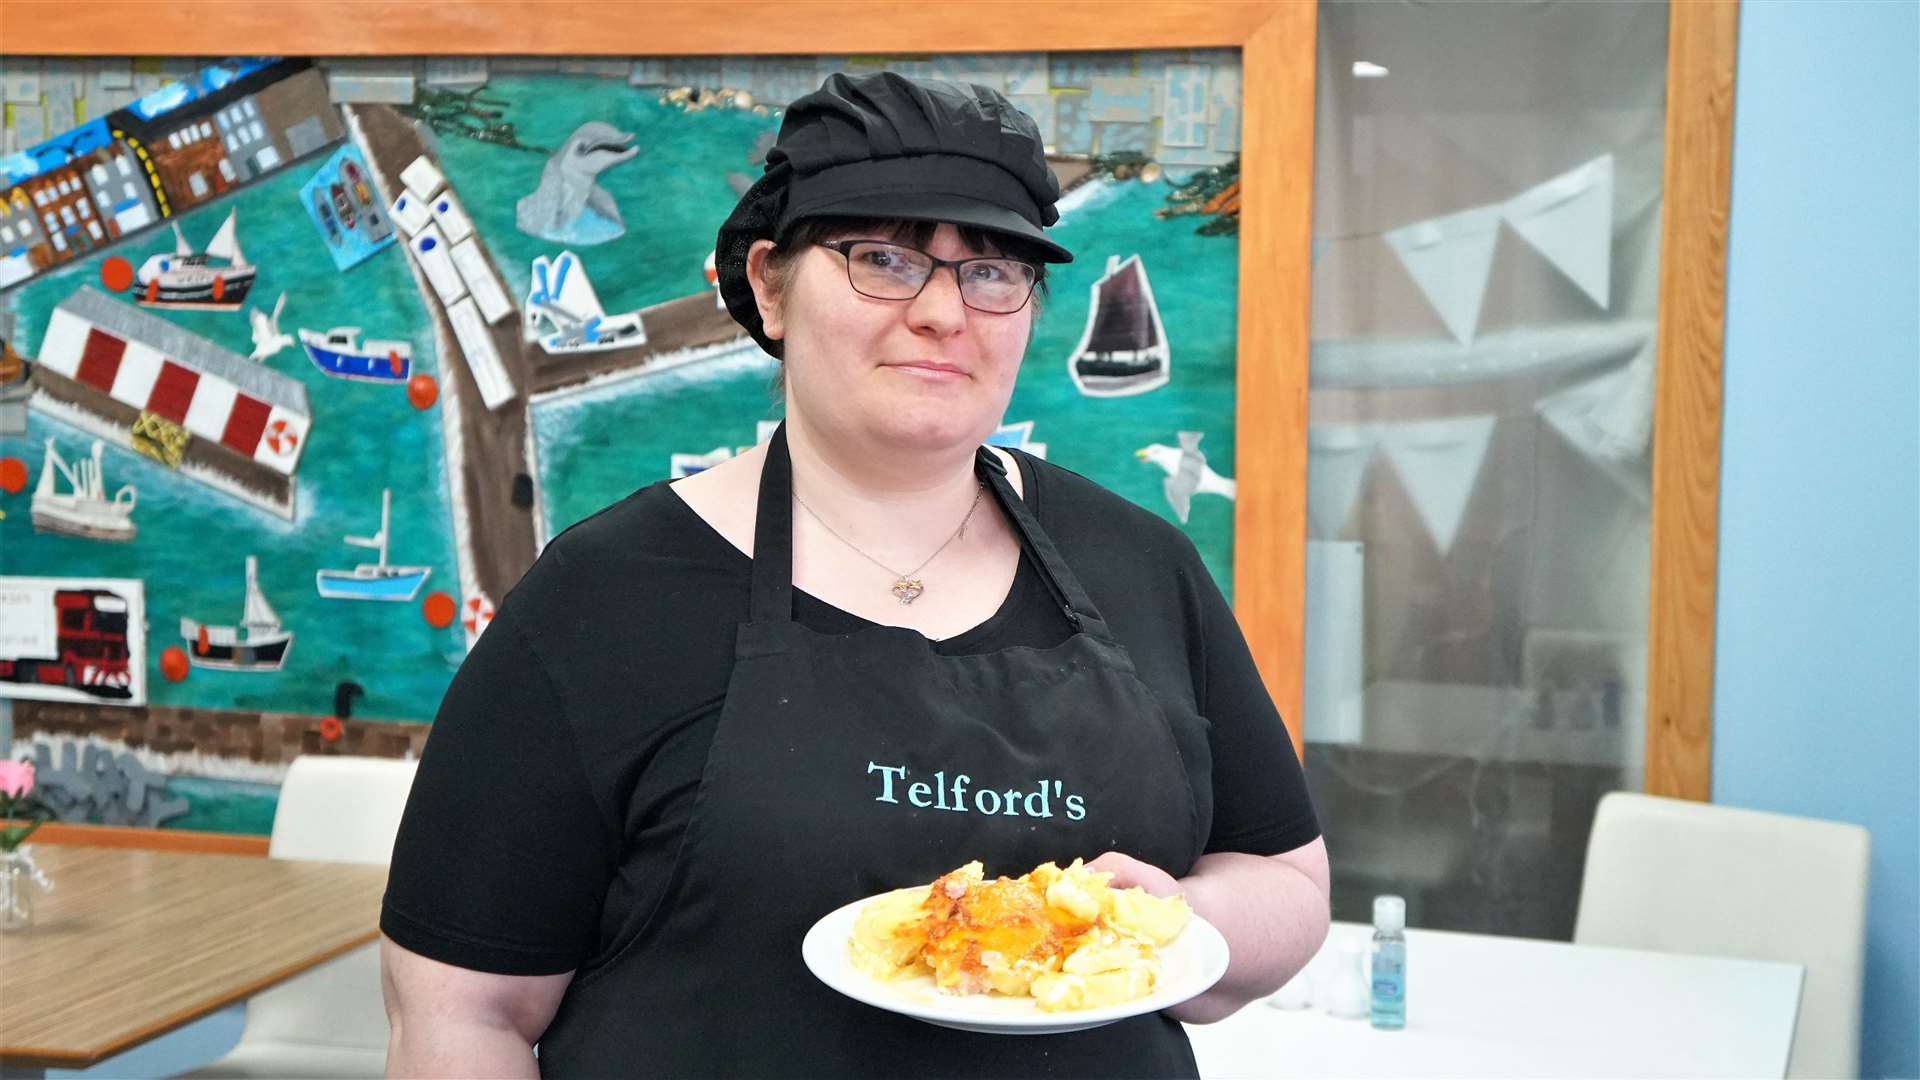 Rose McGowan has been working as a cook at the community café since November last year. She is showing a typical meal served up at the centre – a potato, cheese and bacon bake. Picture: DGS